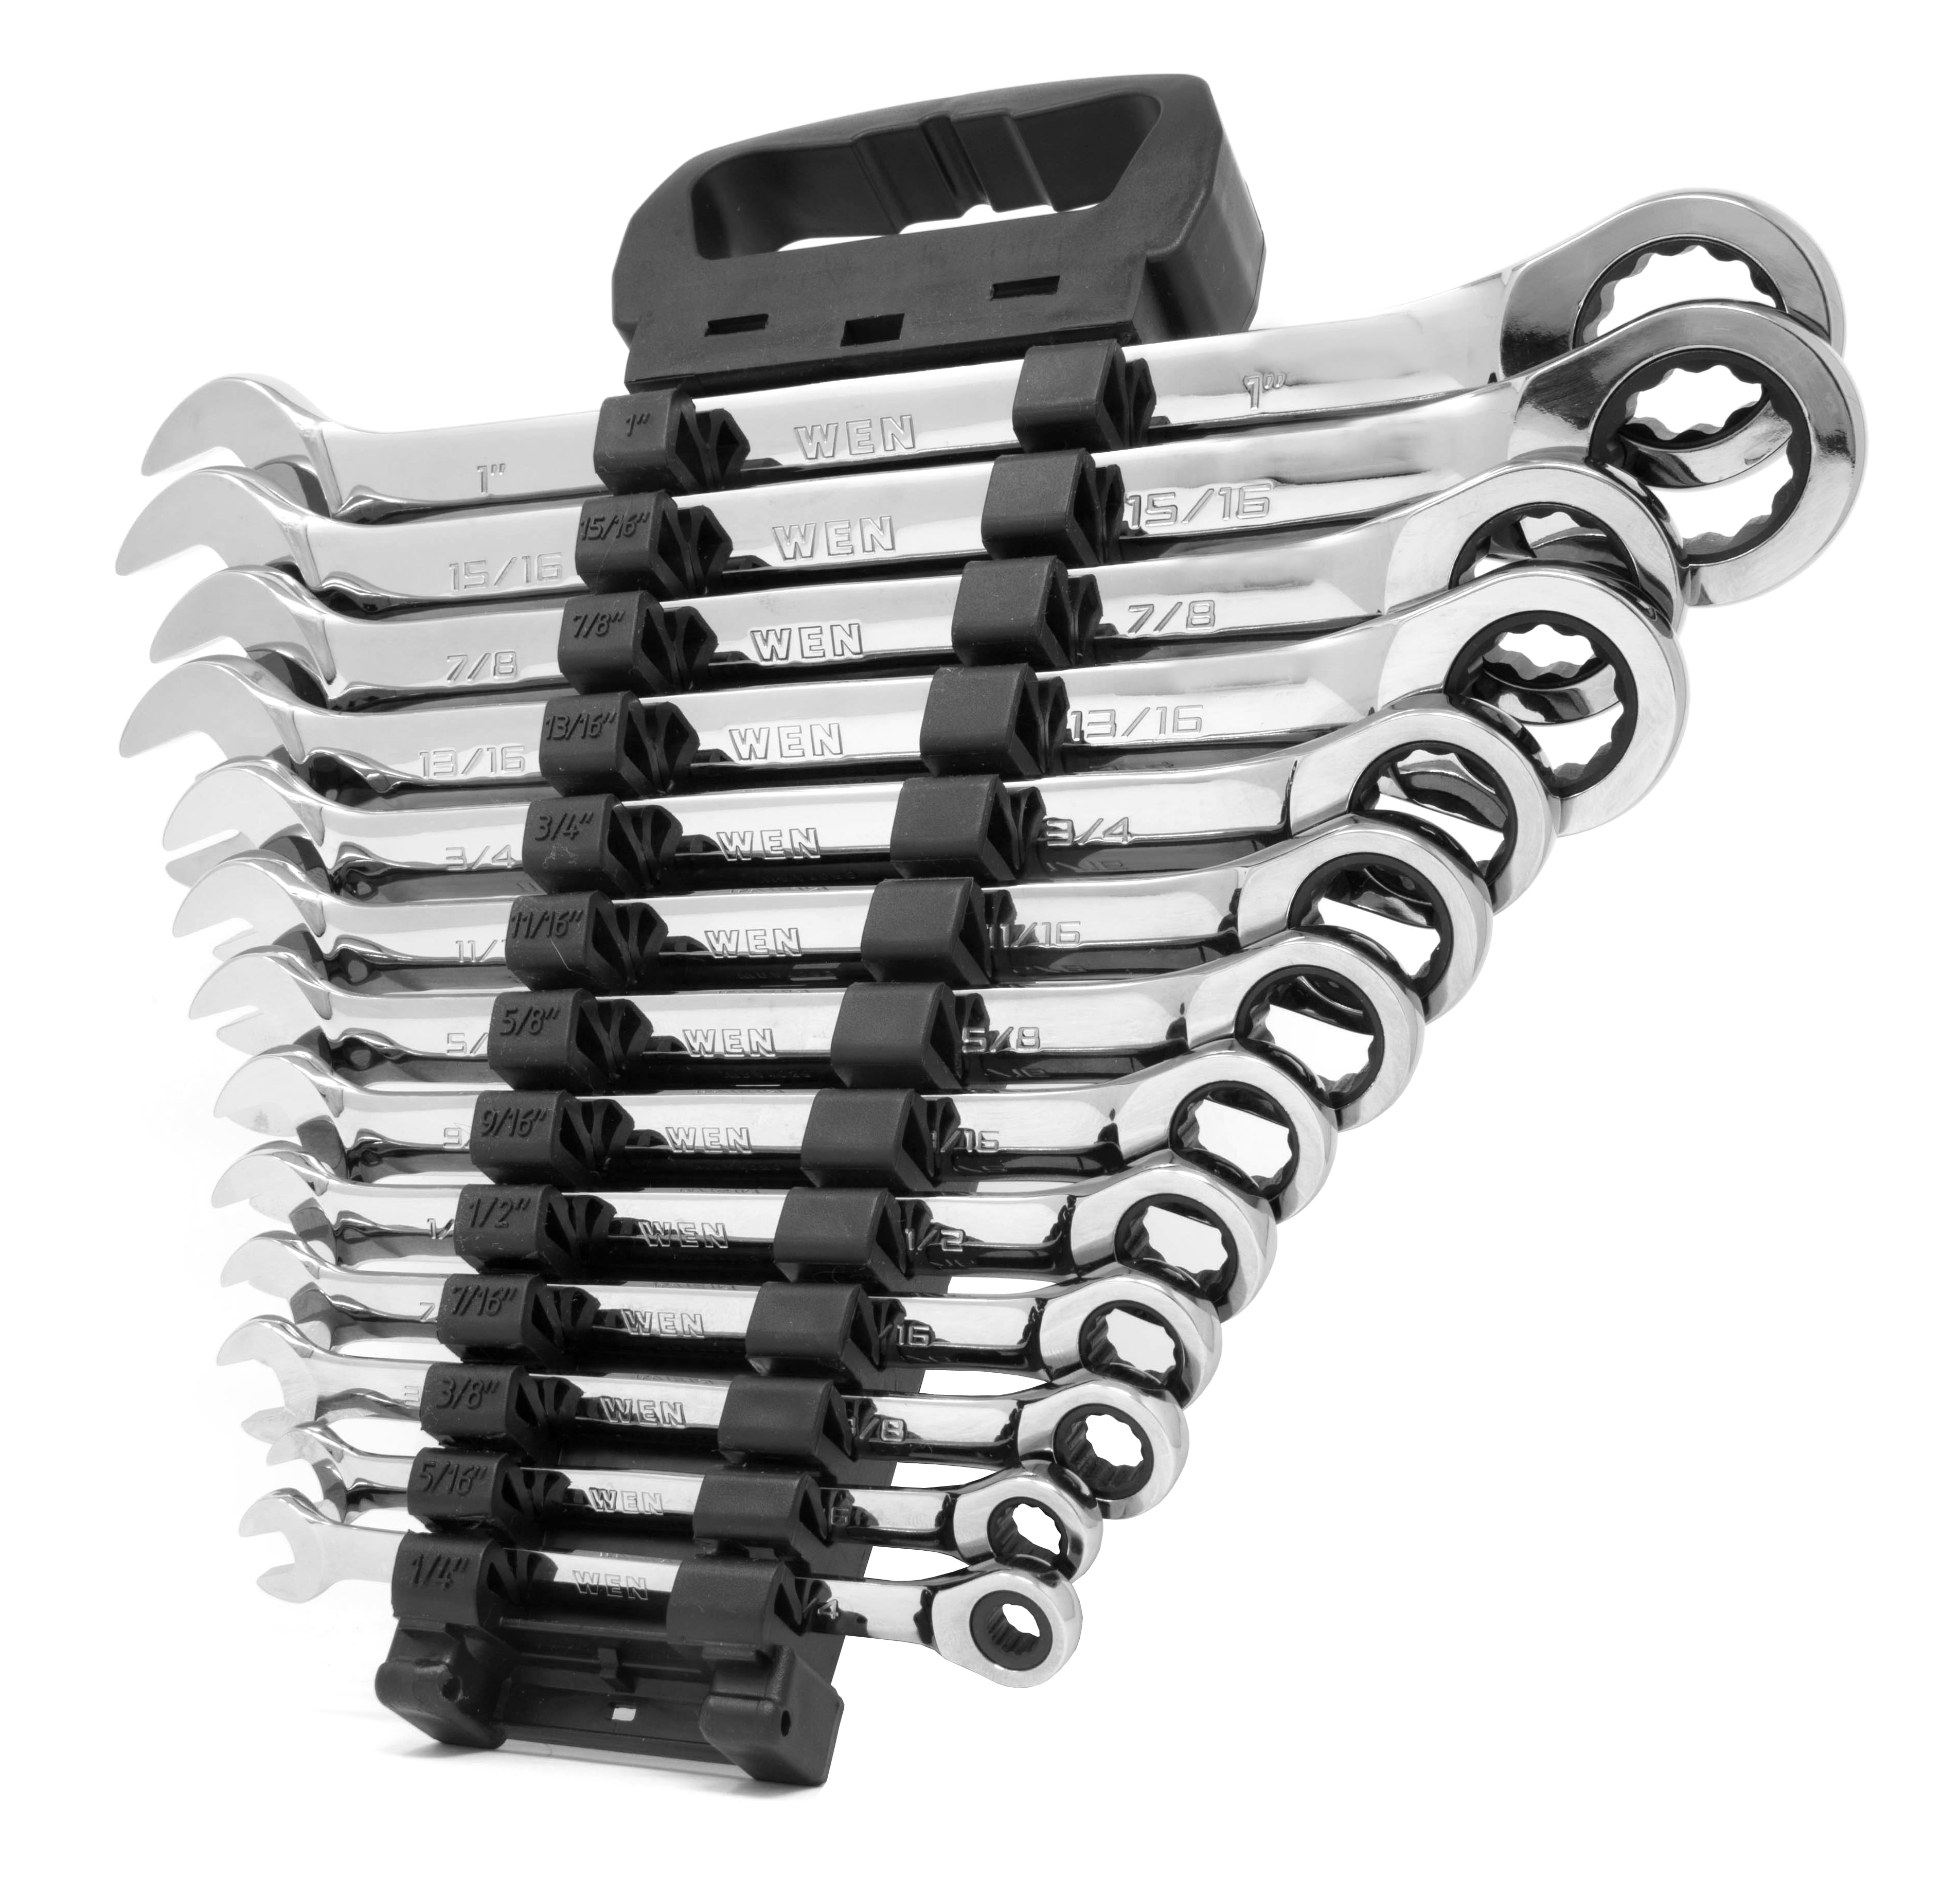 Wholesale Lot of 13/16" Combination Wrenches 10 Pieces 